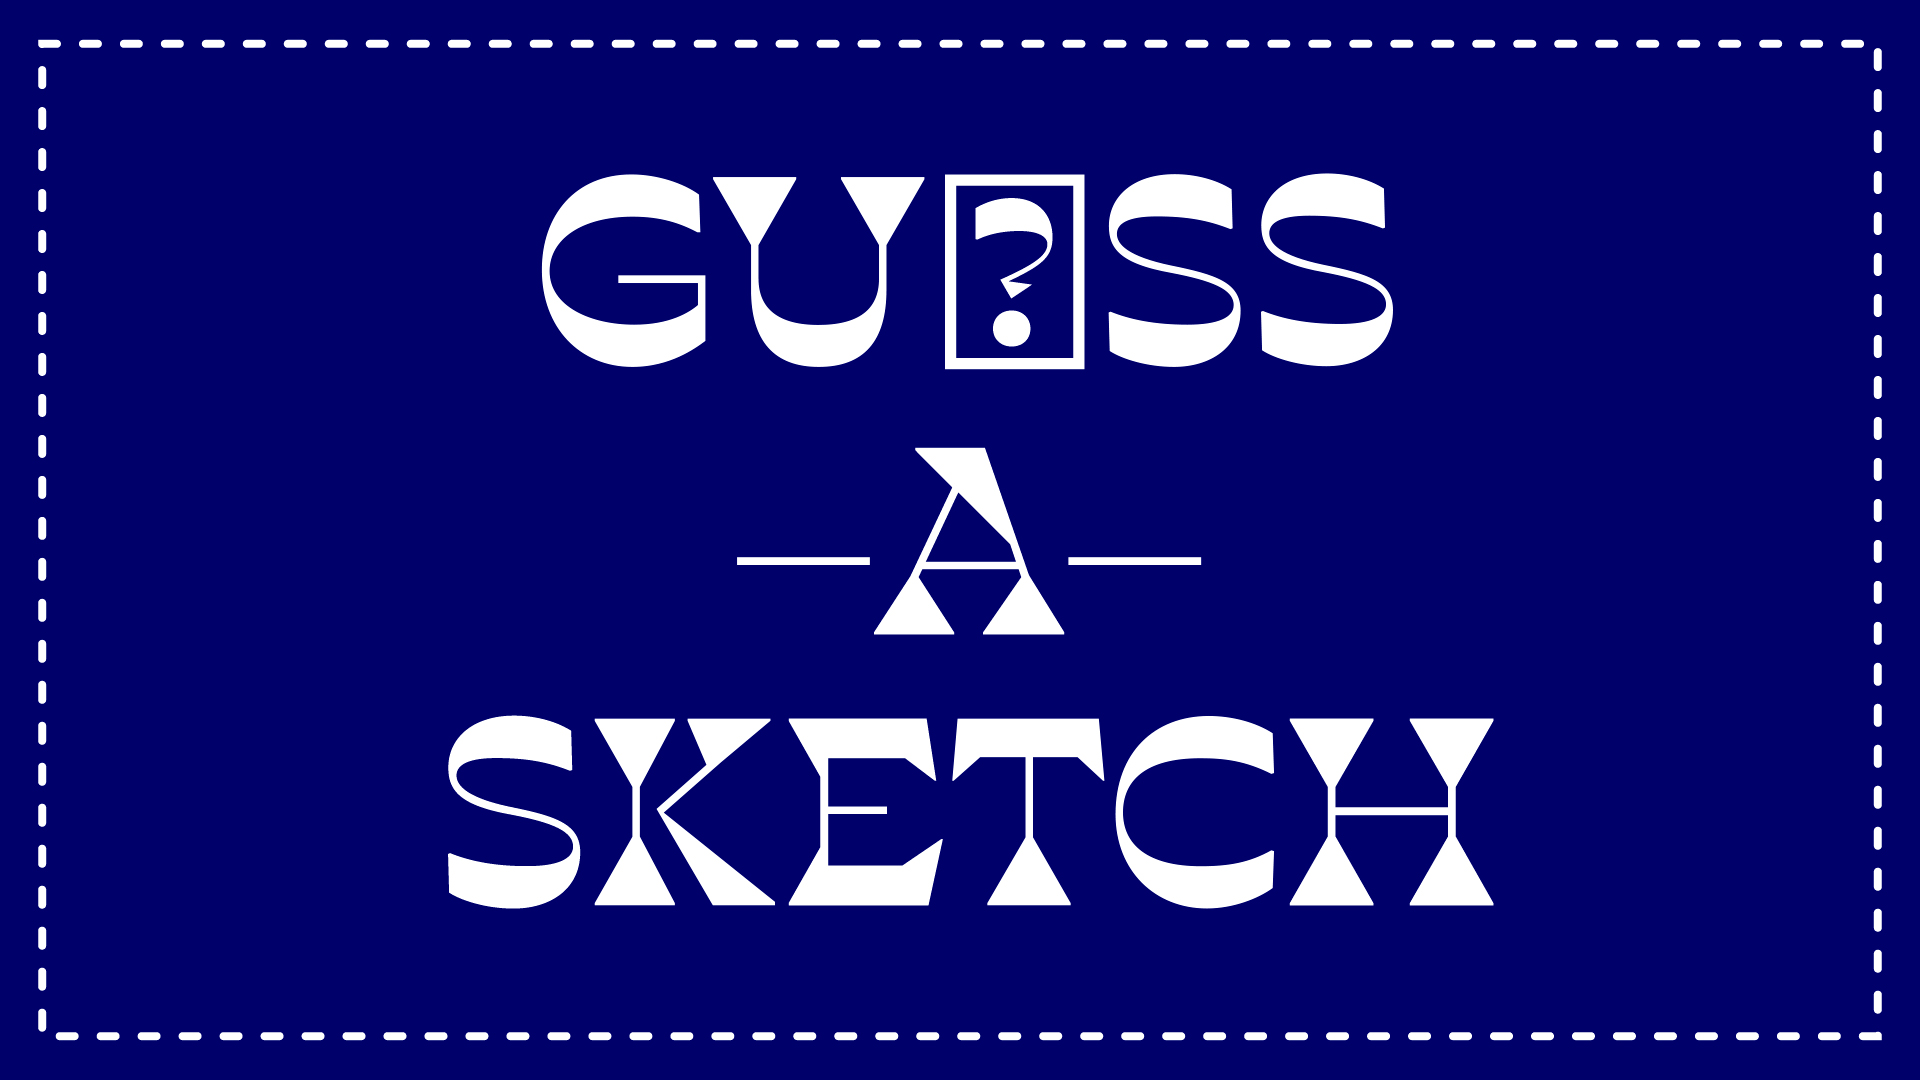 Guess-A-Sketch animated logo